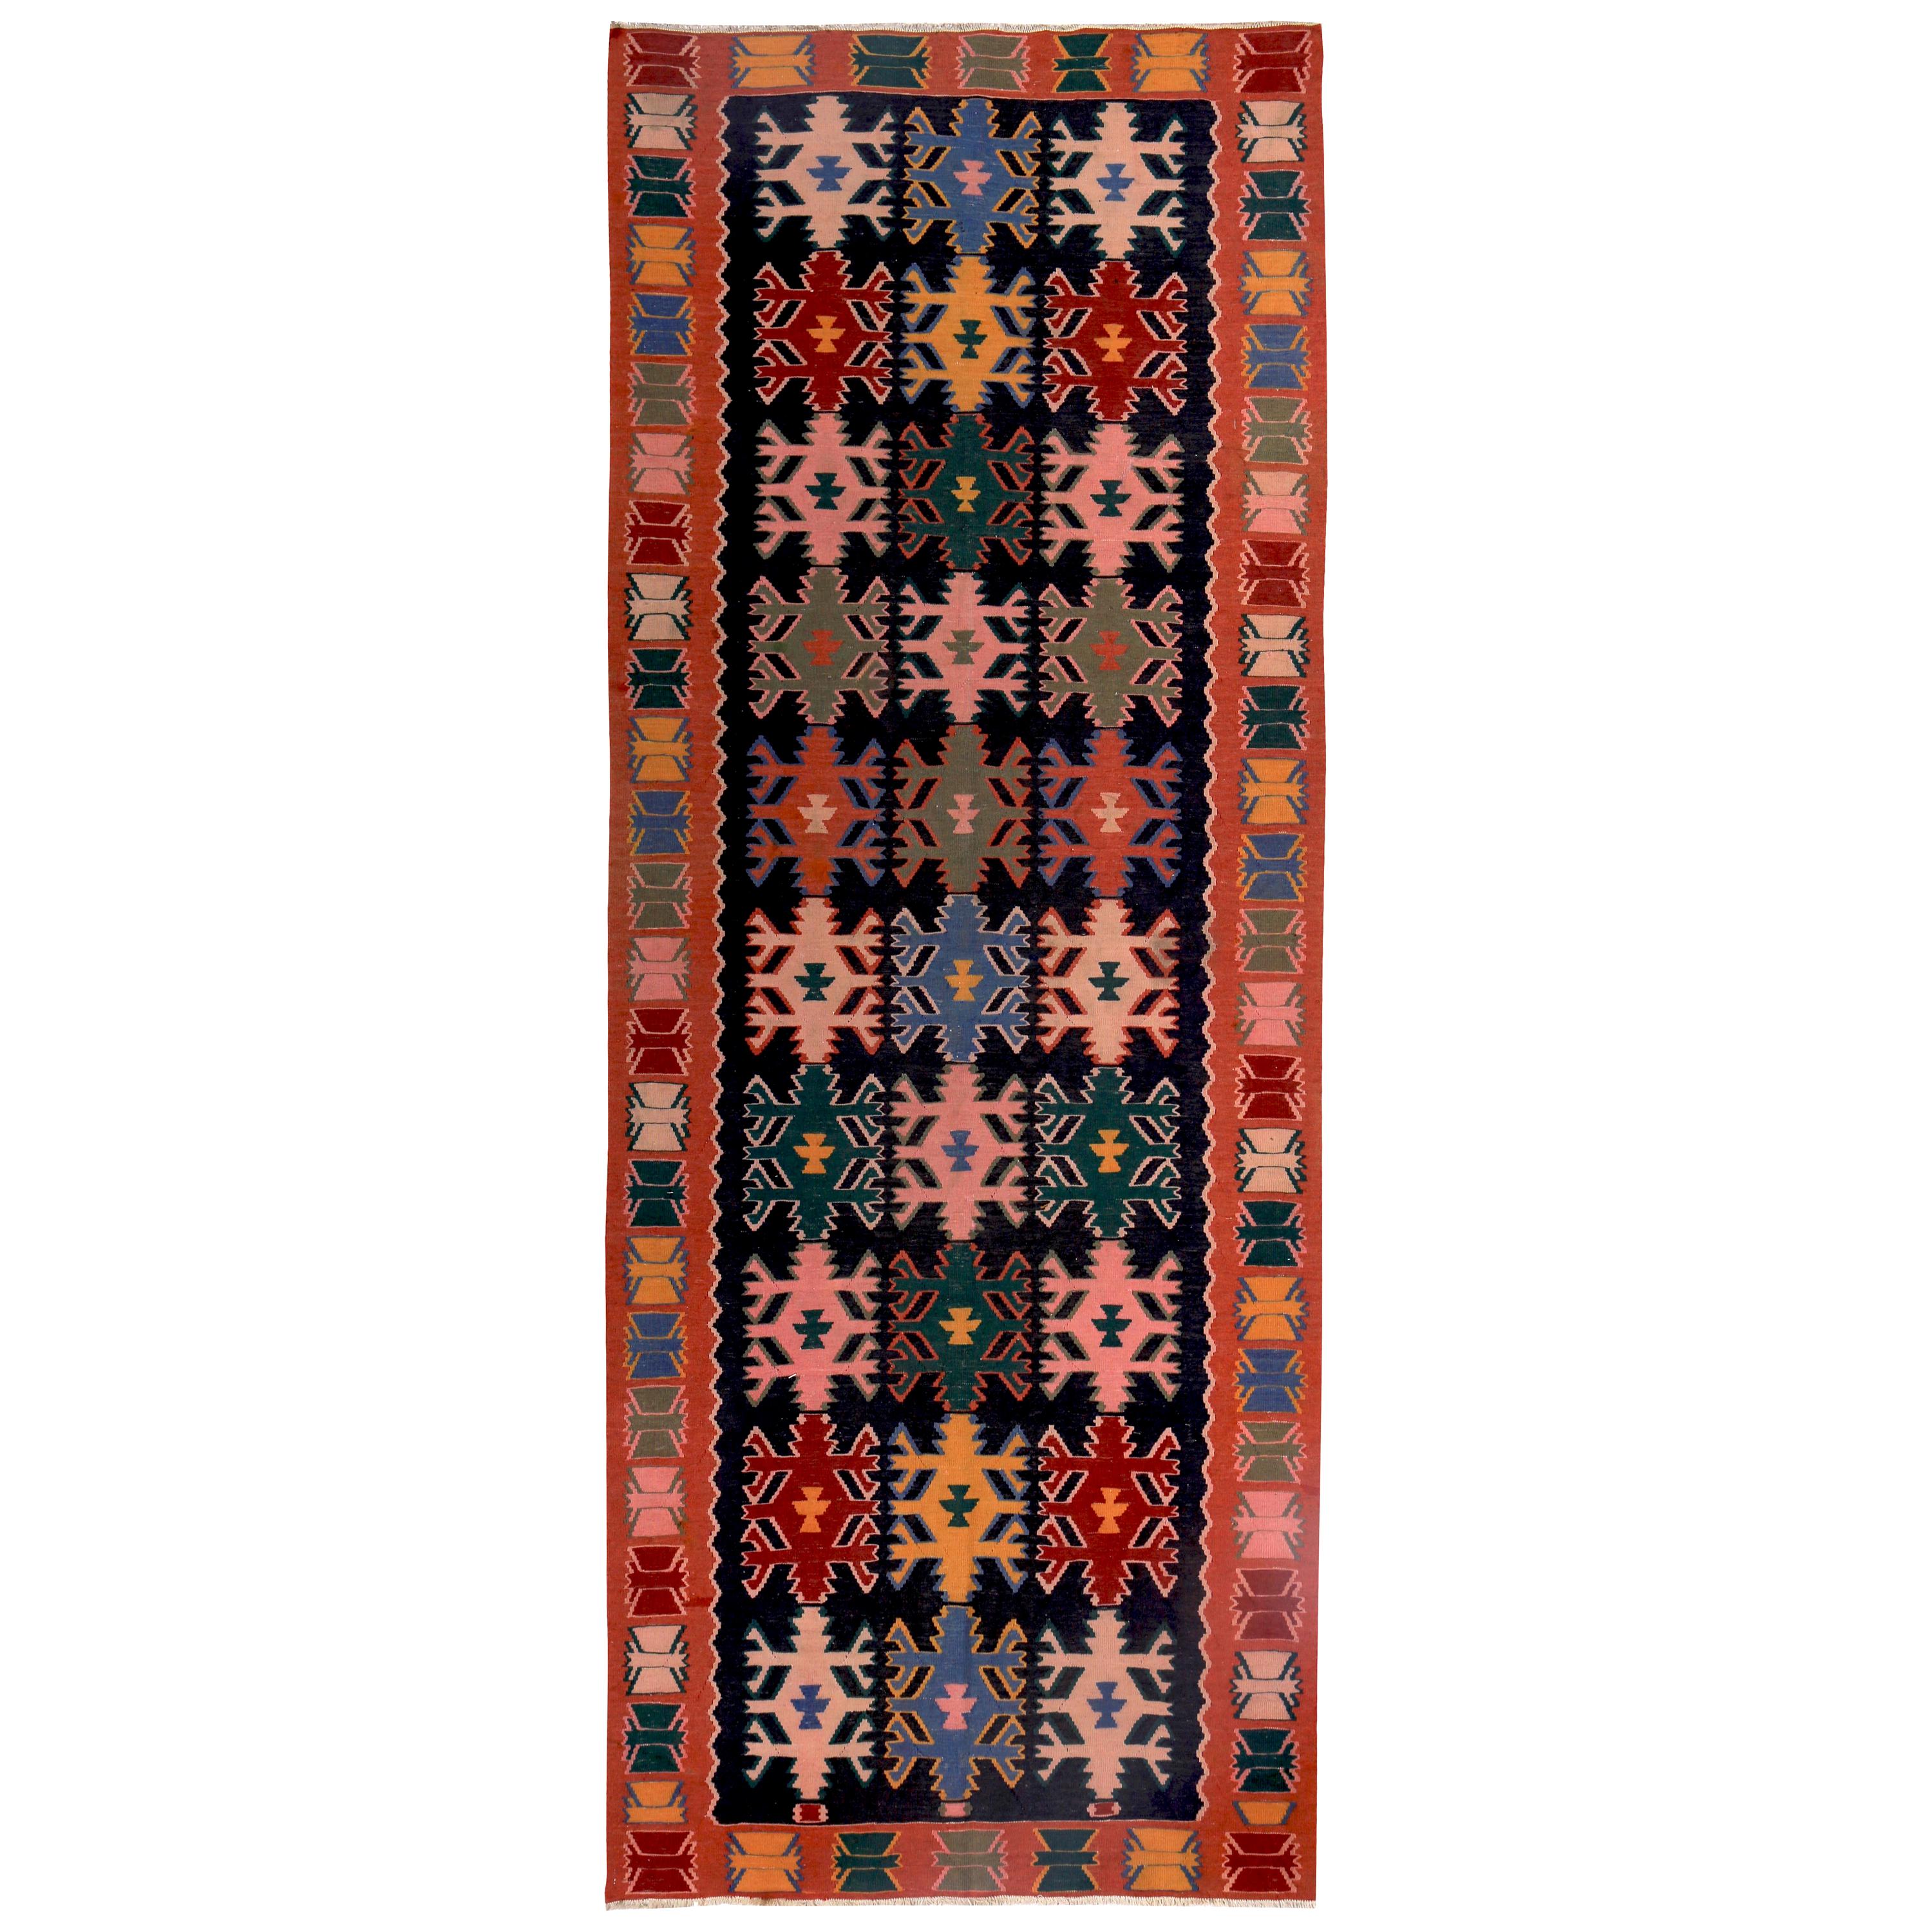 Turkish Kilim Runner Rug with Tribal Details in Green, Blue and Pink